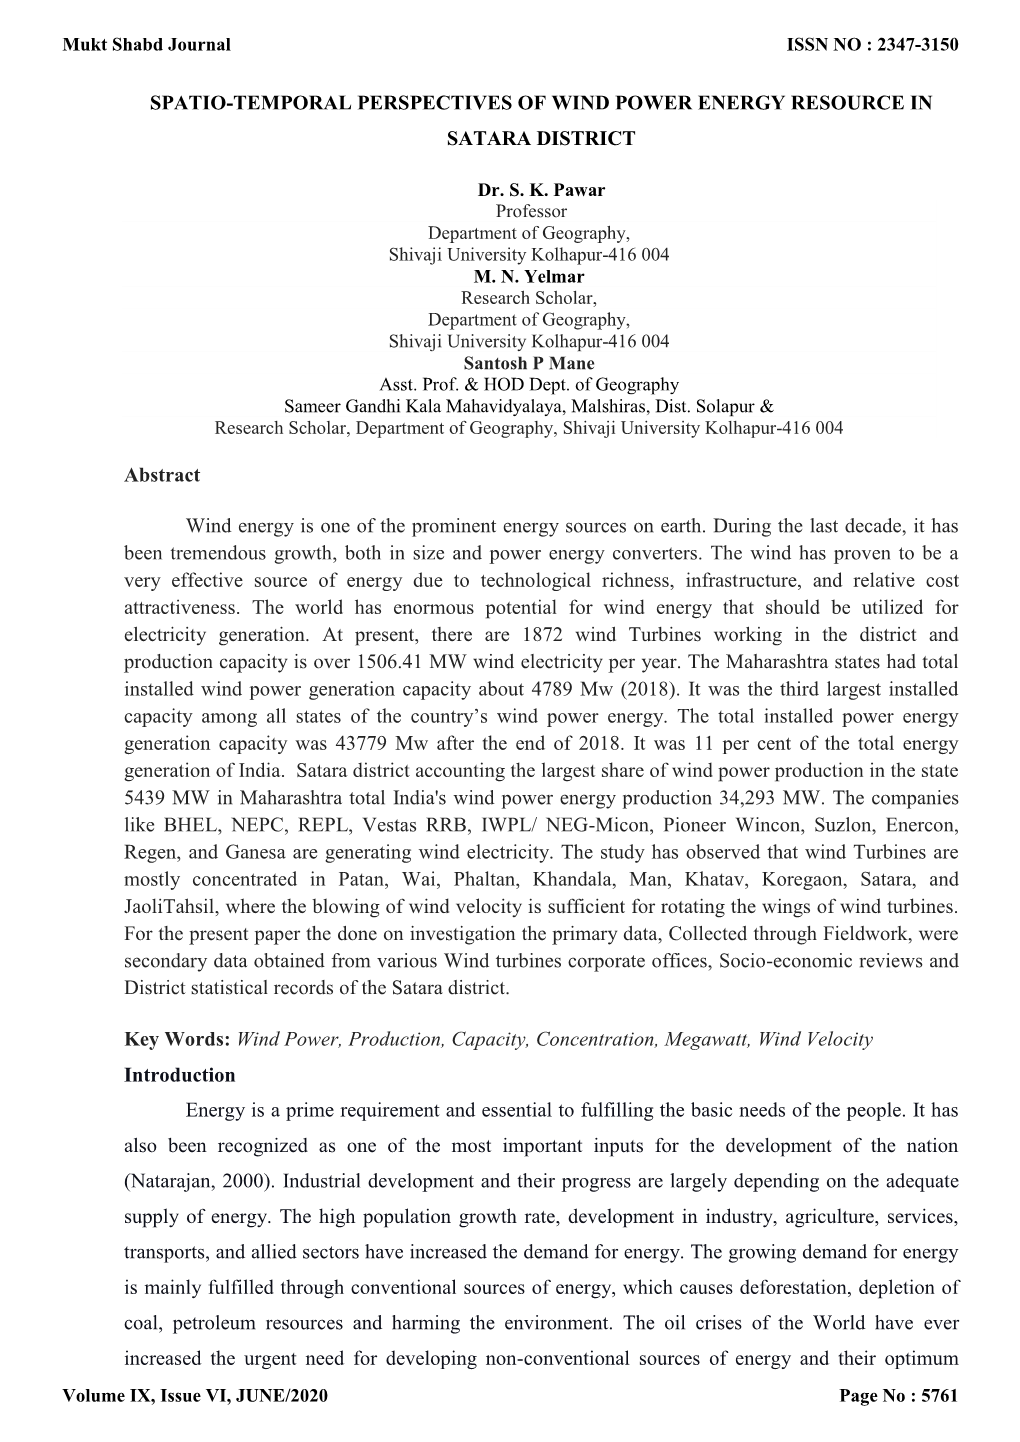 Spatio-Temporal Perspectives of Wind Power Energy Resource in Satara District